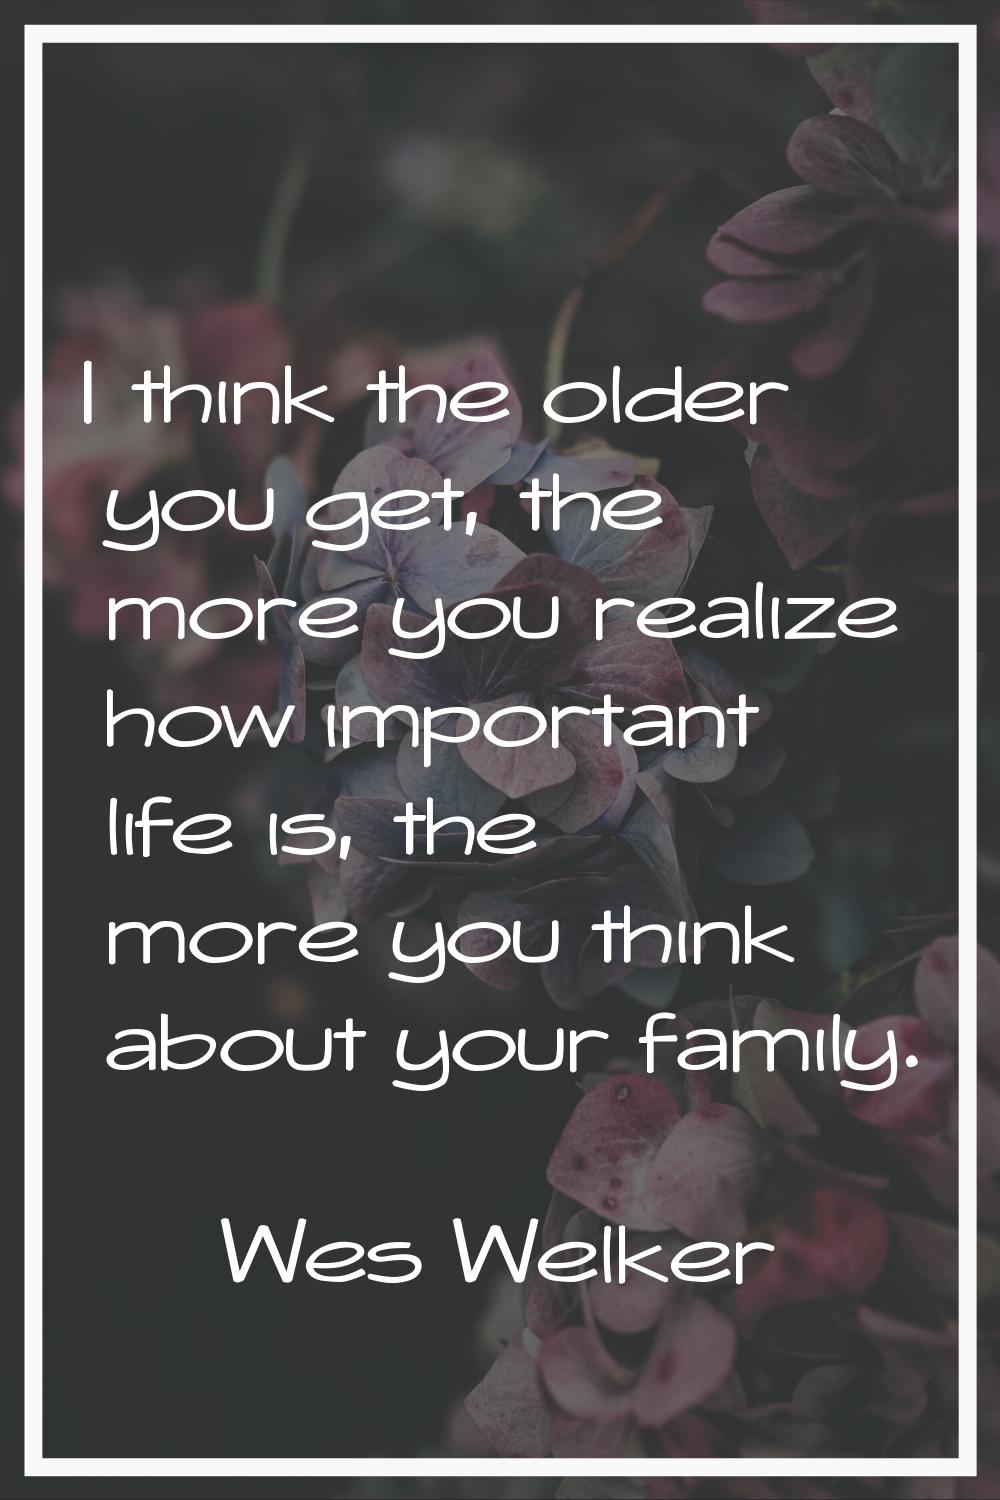 I think the older you get, the more you realize how important life is, the more you think about you